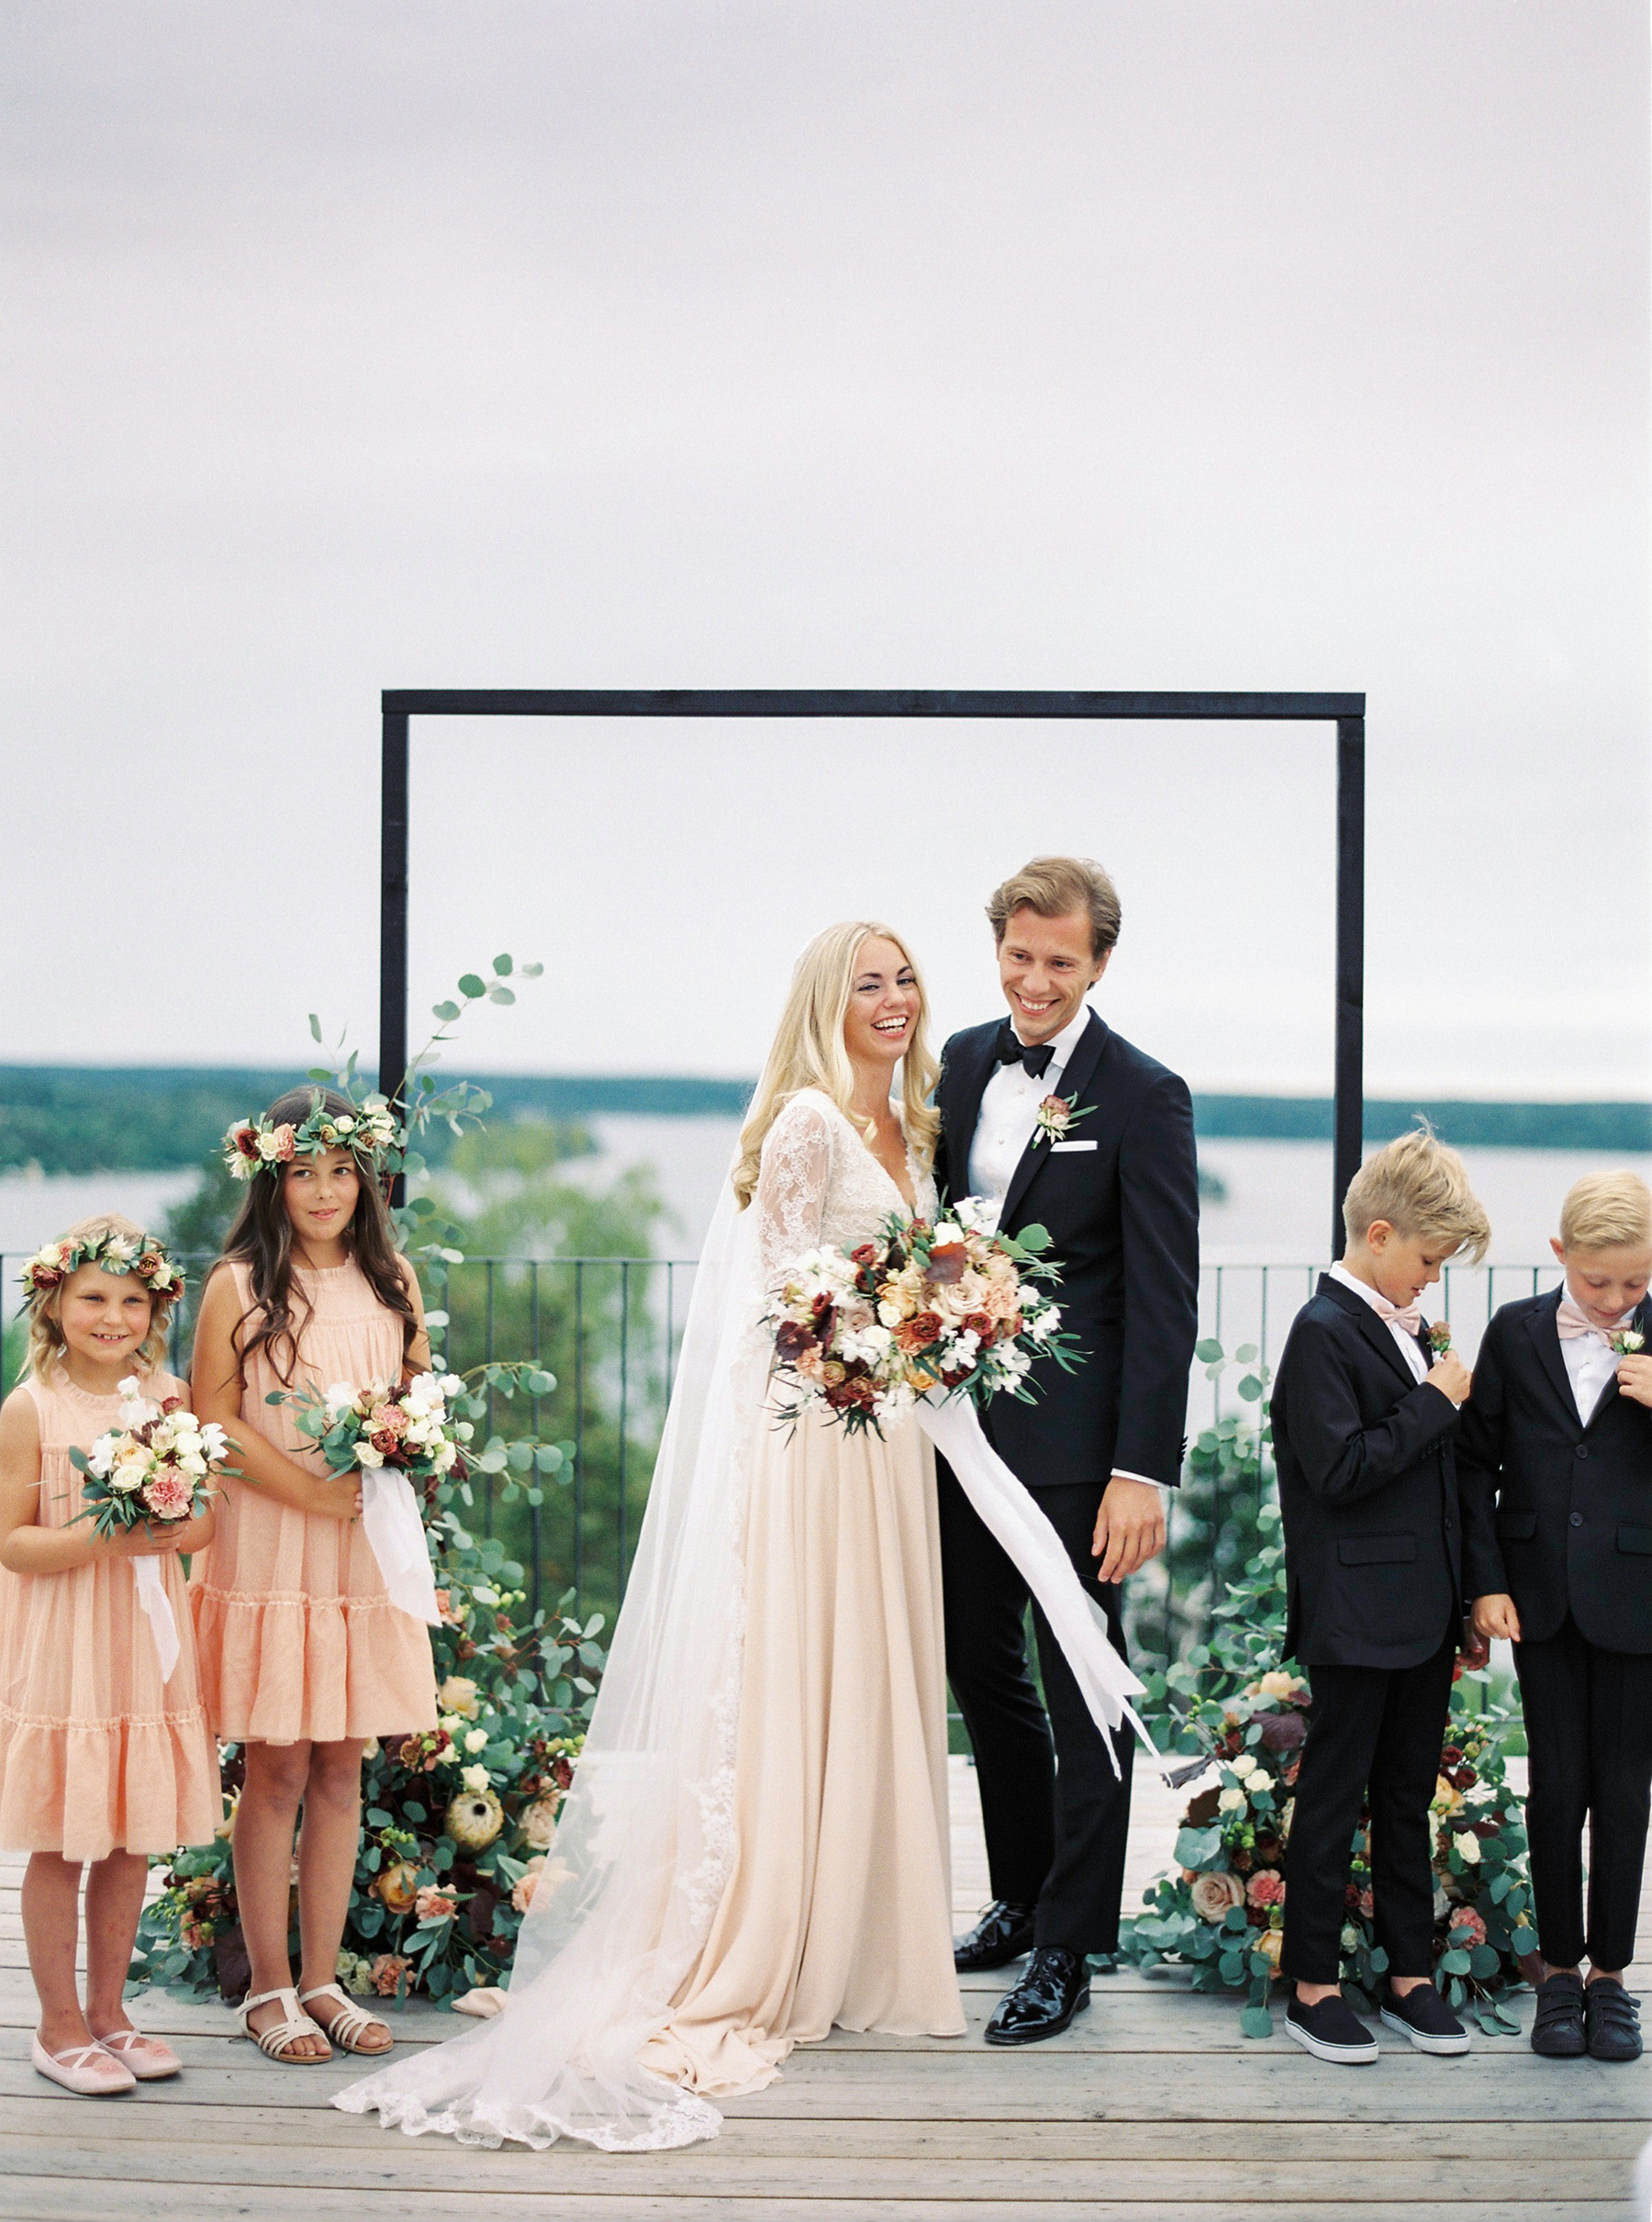 Bright and Warm Colored Wedding Inspiration in Sweden 2 Brides Photography16